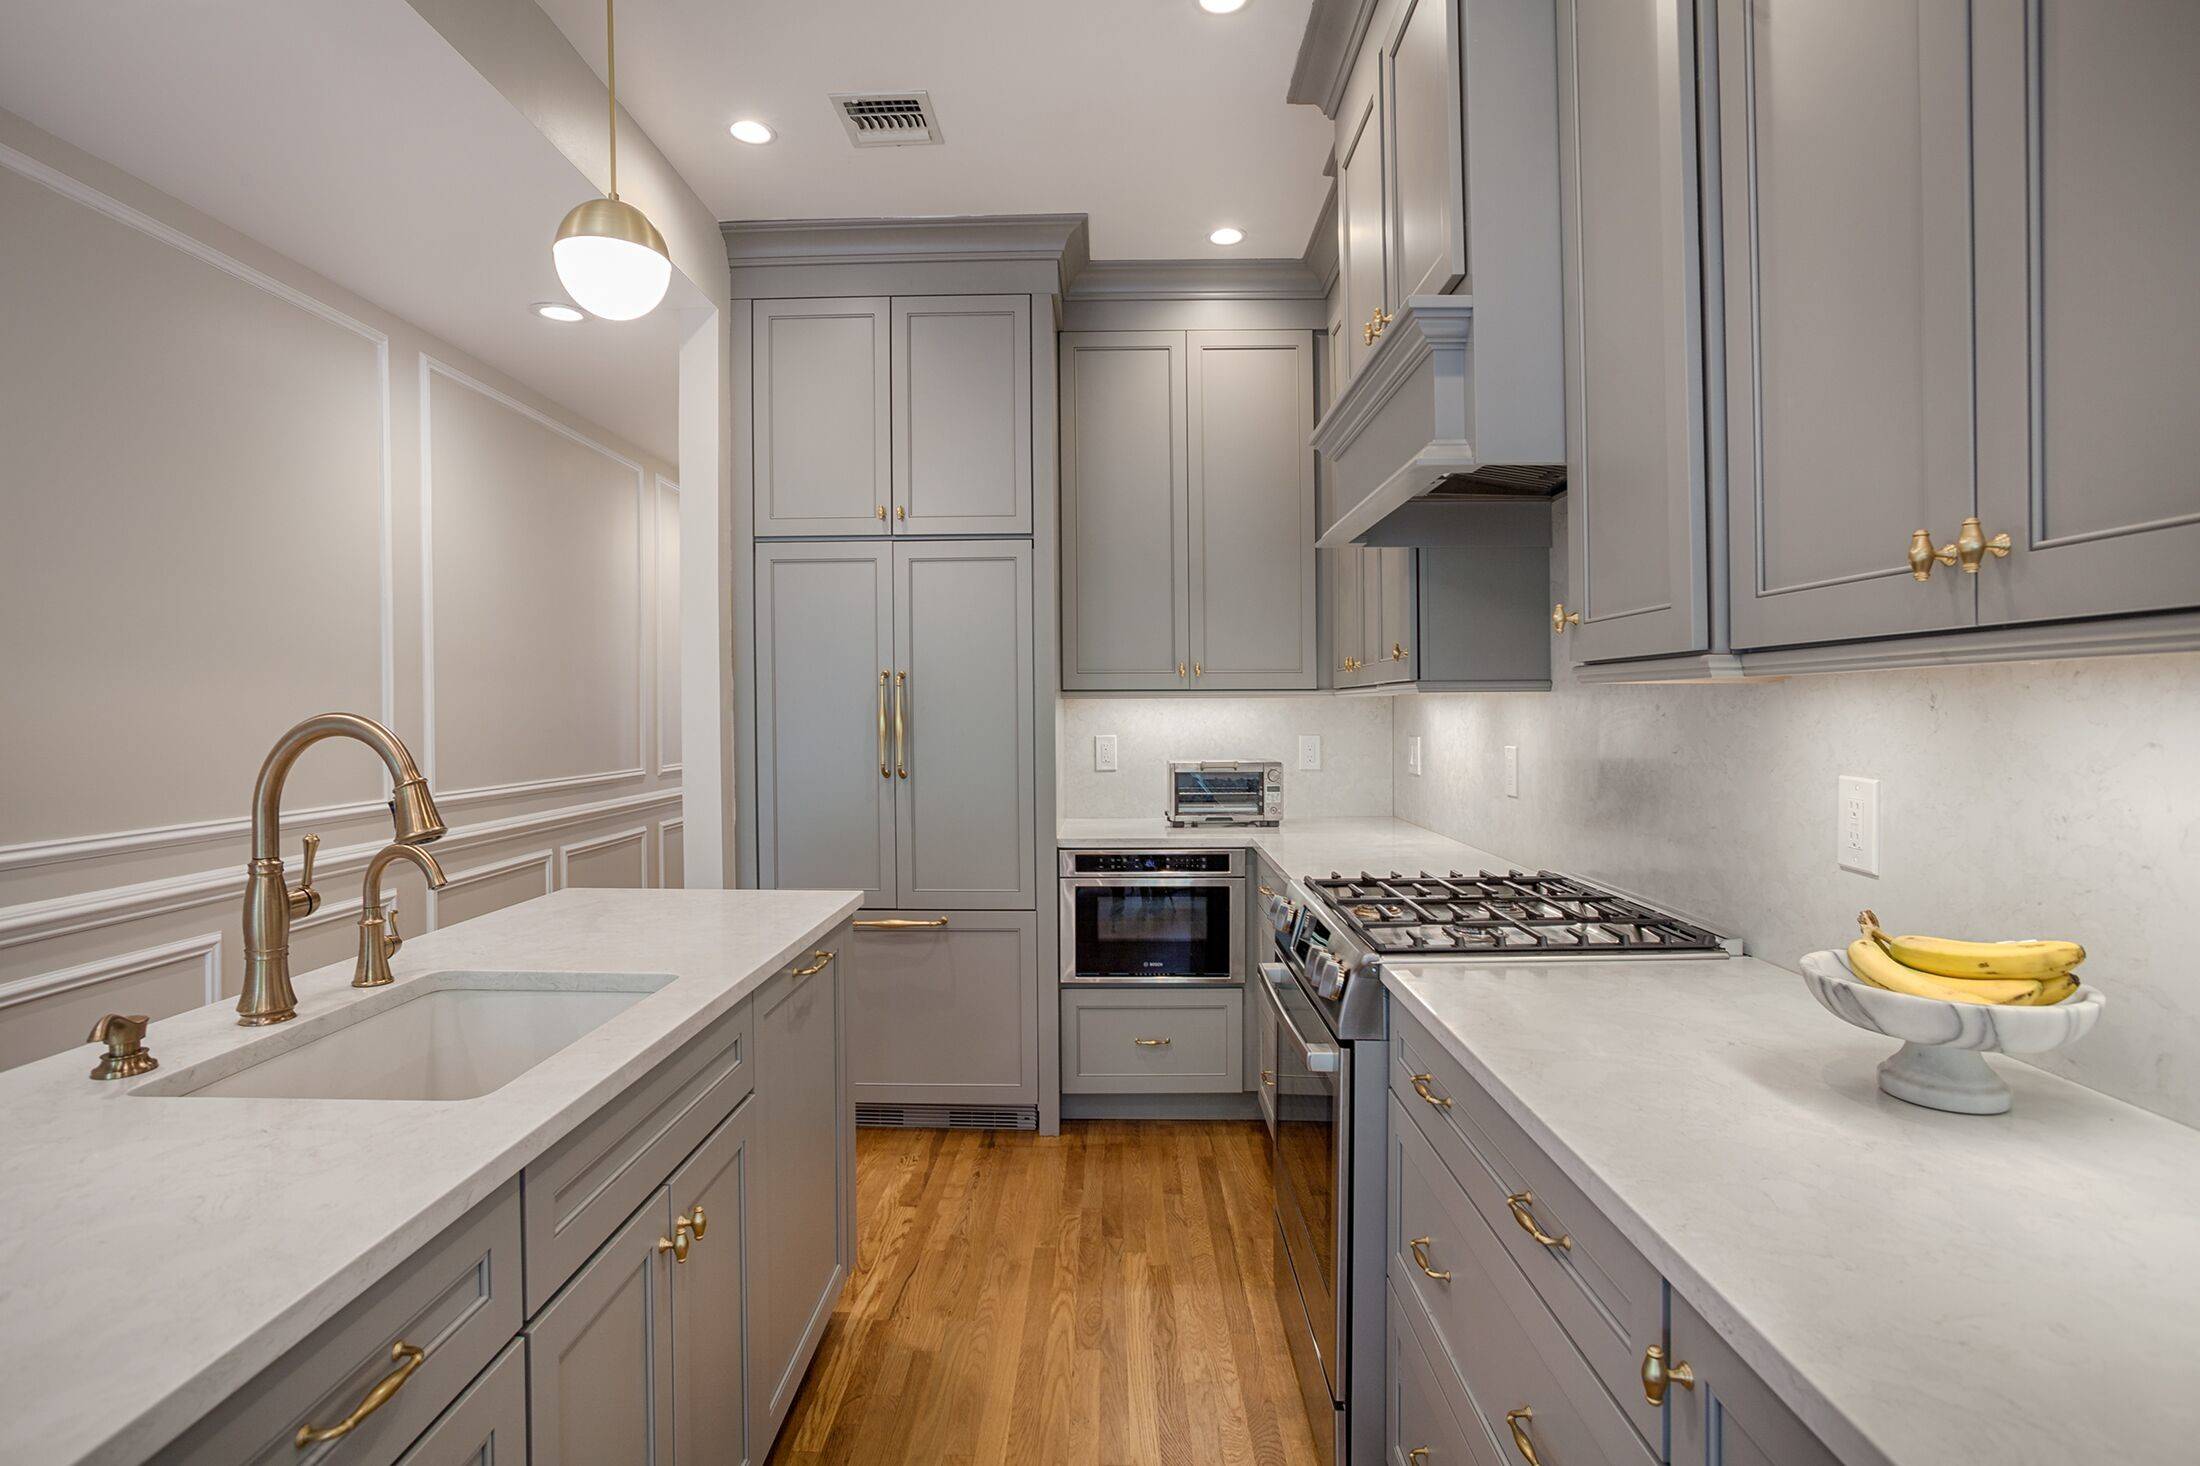 75 Beautiful Small L Shaped Kitchen Pictures Ideas July 2021 Houzz